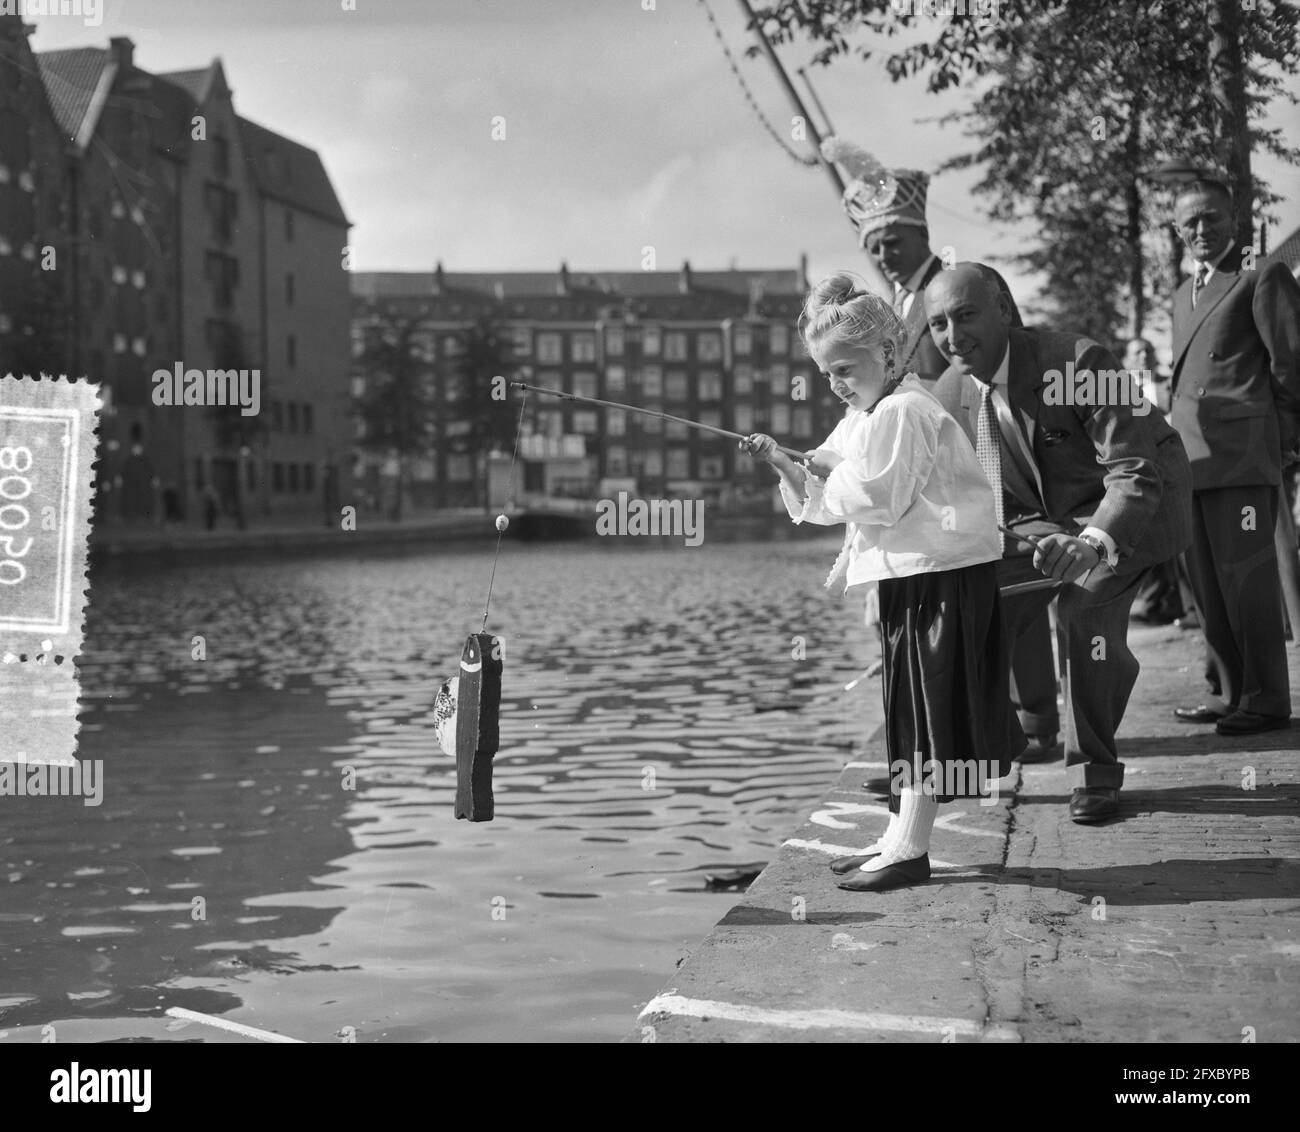 Jordaan Festival Brouwersgracht the youth fishes, September 16, 1956, Youth, The Netherlands, 20th century press agency photo, news to remember, documentary, historic photography 1945-1990, visual stories, human history of the Twentieth Century, capturing moments in time Stock Photo